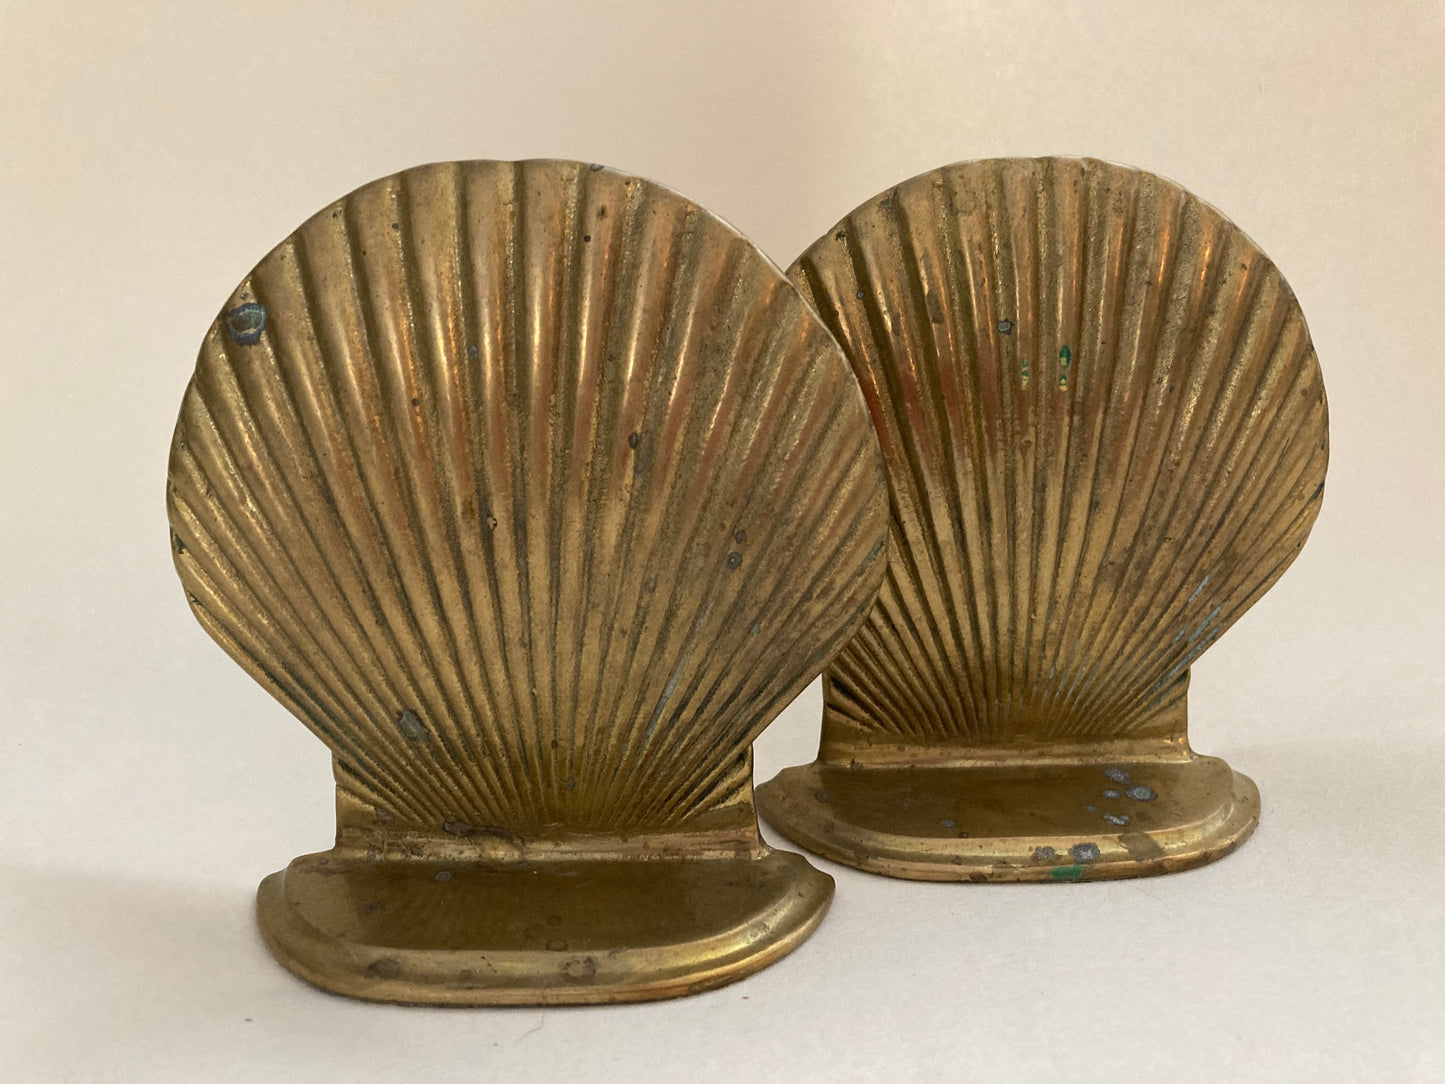 Shell Bookends